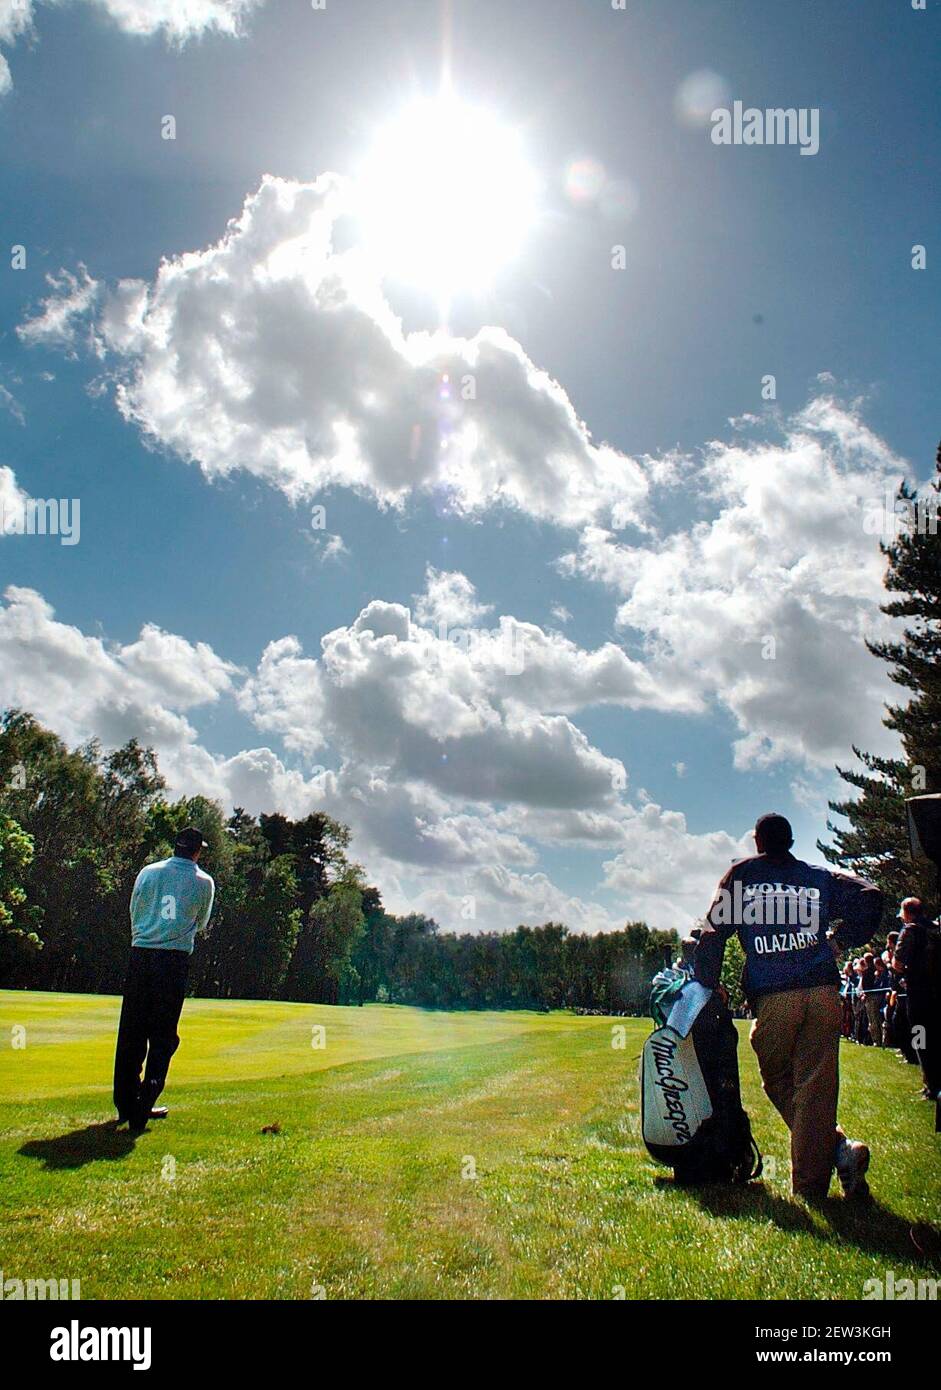 VOLVO PGA CHAMPIONSHIP AT WENTWORTH 23/5/2002 COLIN MONTGOMERIE jose maria olazabal 2ND ON THE 12TH PICTURE DAVID ASHDOWN.GOLF Stock Photo